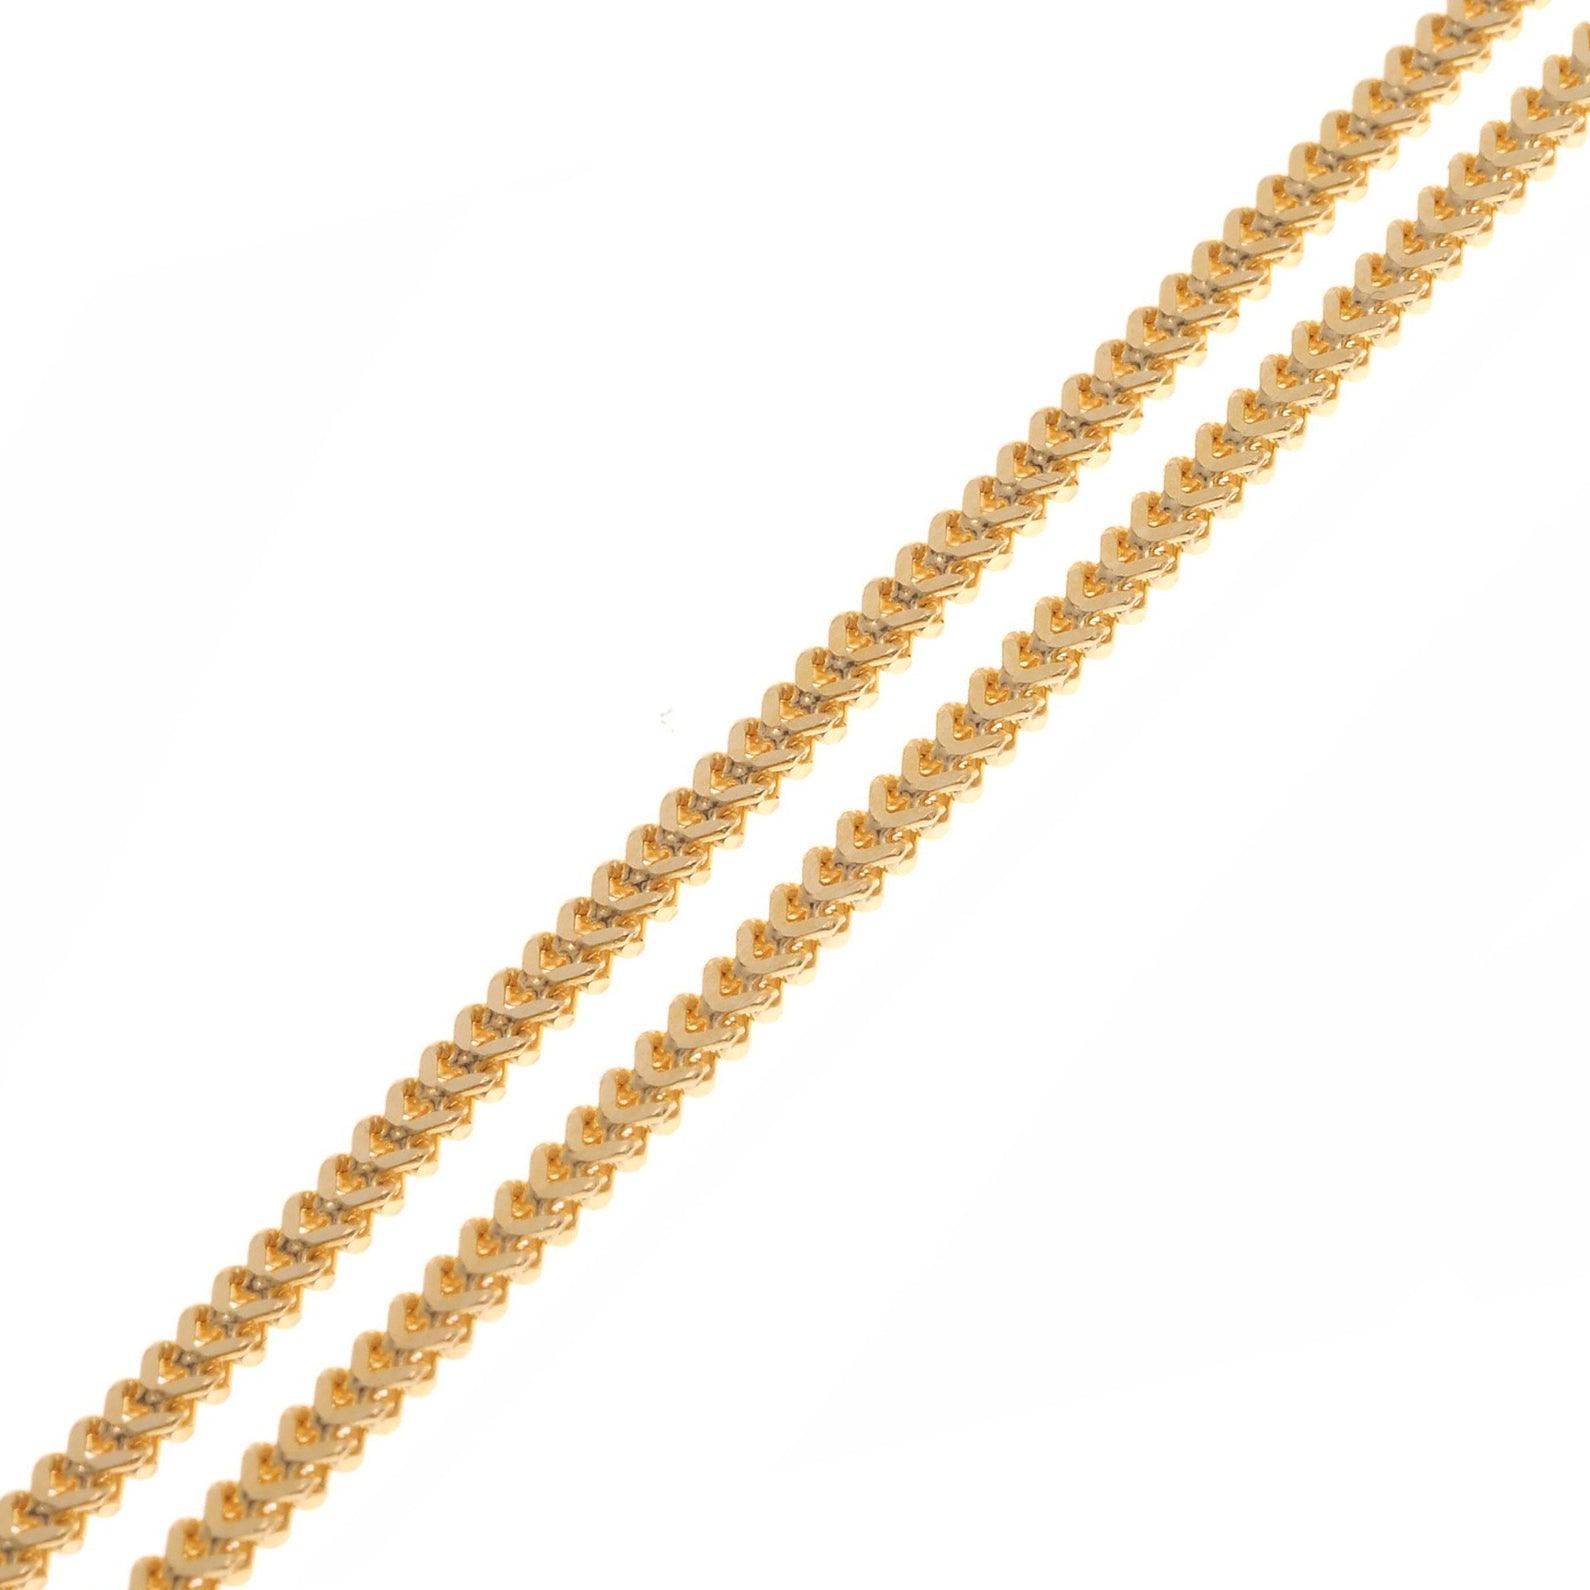 22ct Gold Unisex Foxtail Chain with a lobster clasp C-3796 - Minar Jewellers